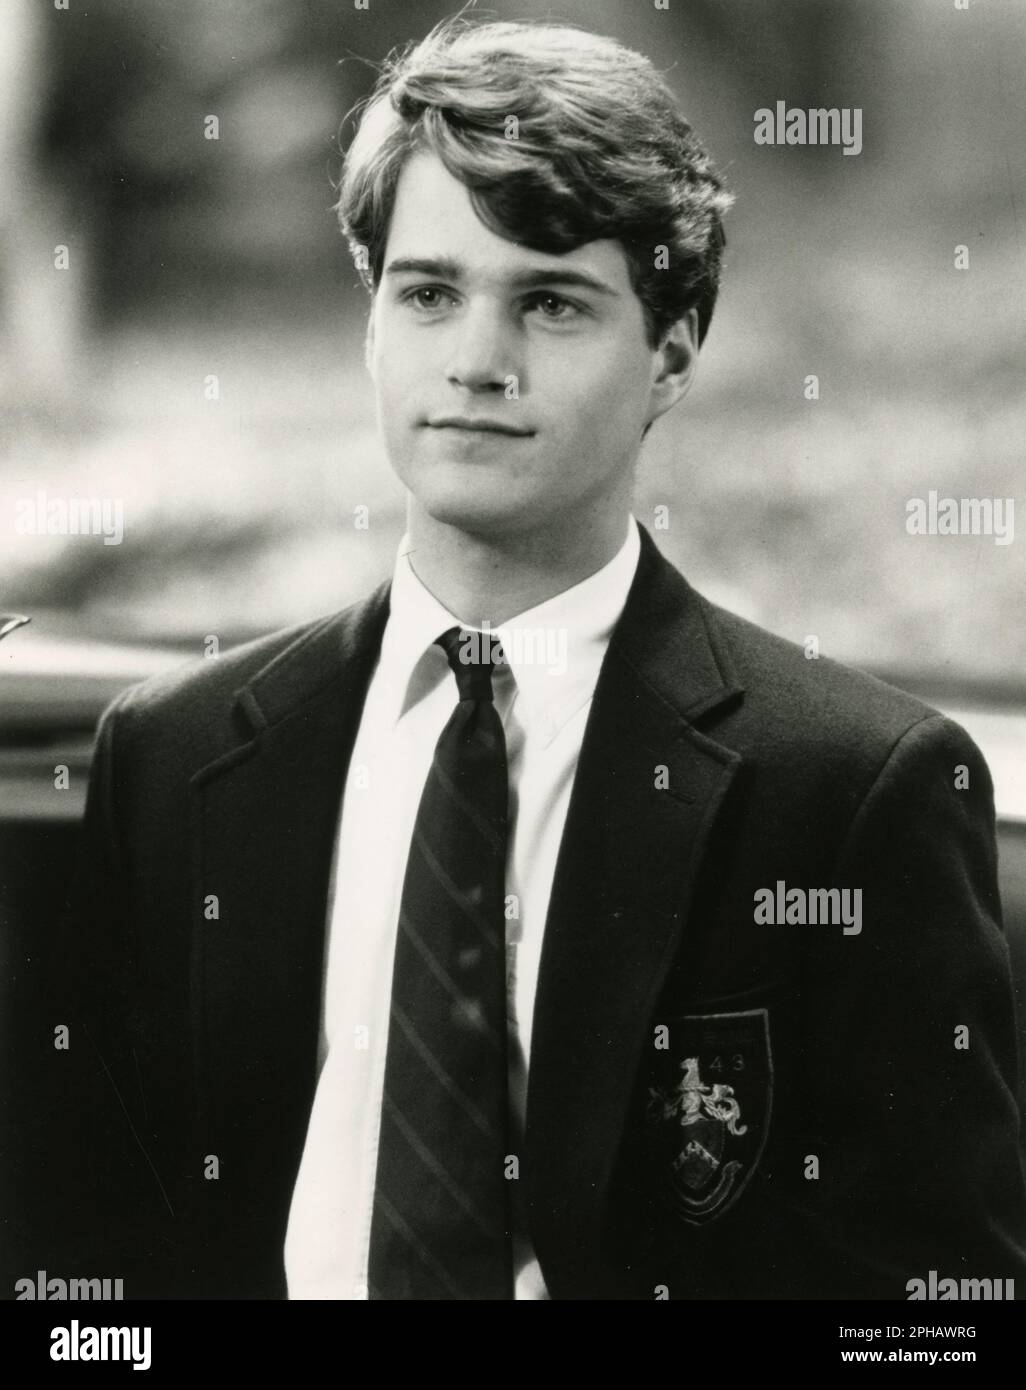 Actor Chris O'Donnell in the movie Scent of a Woman, USA 1992 Stock Photo